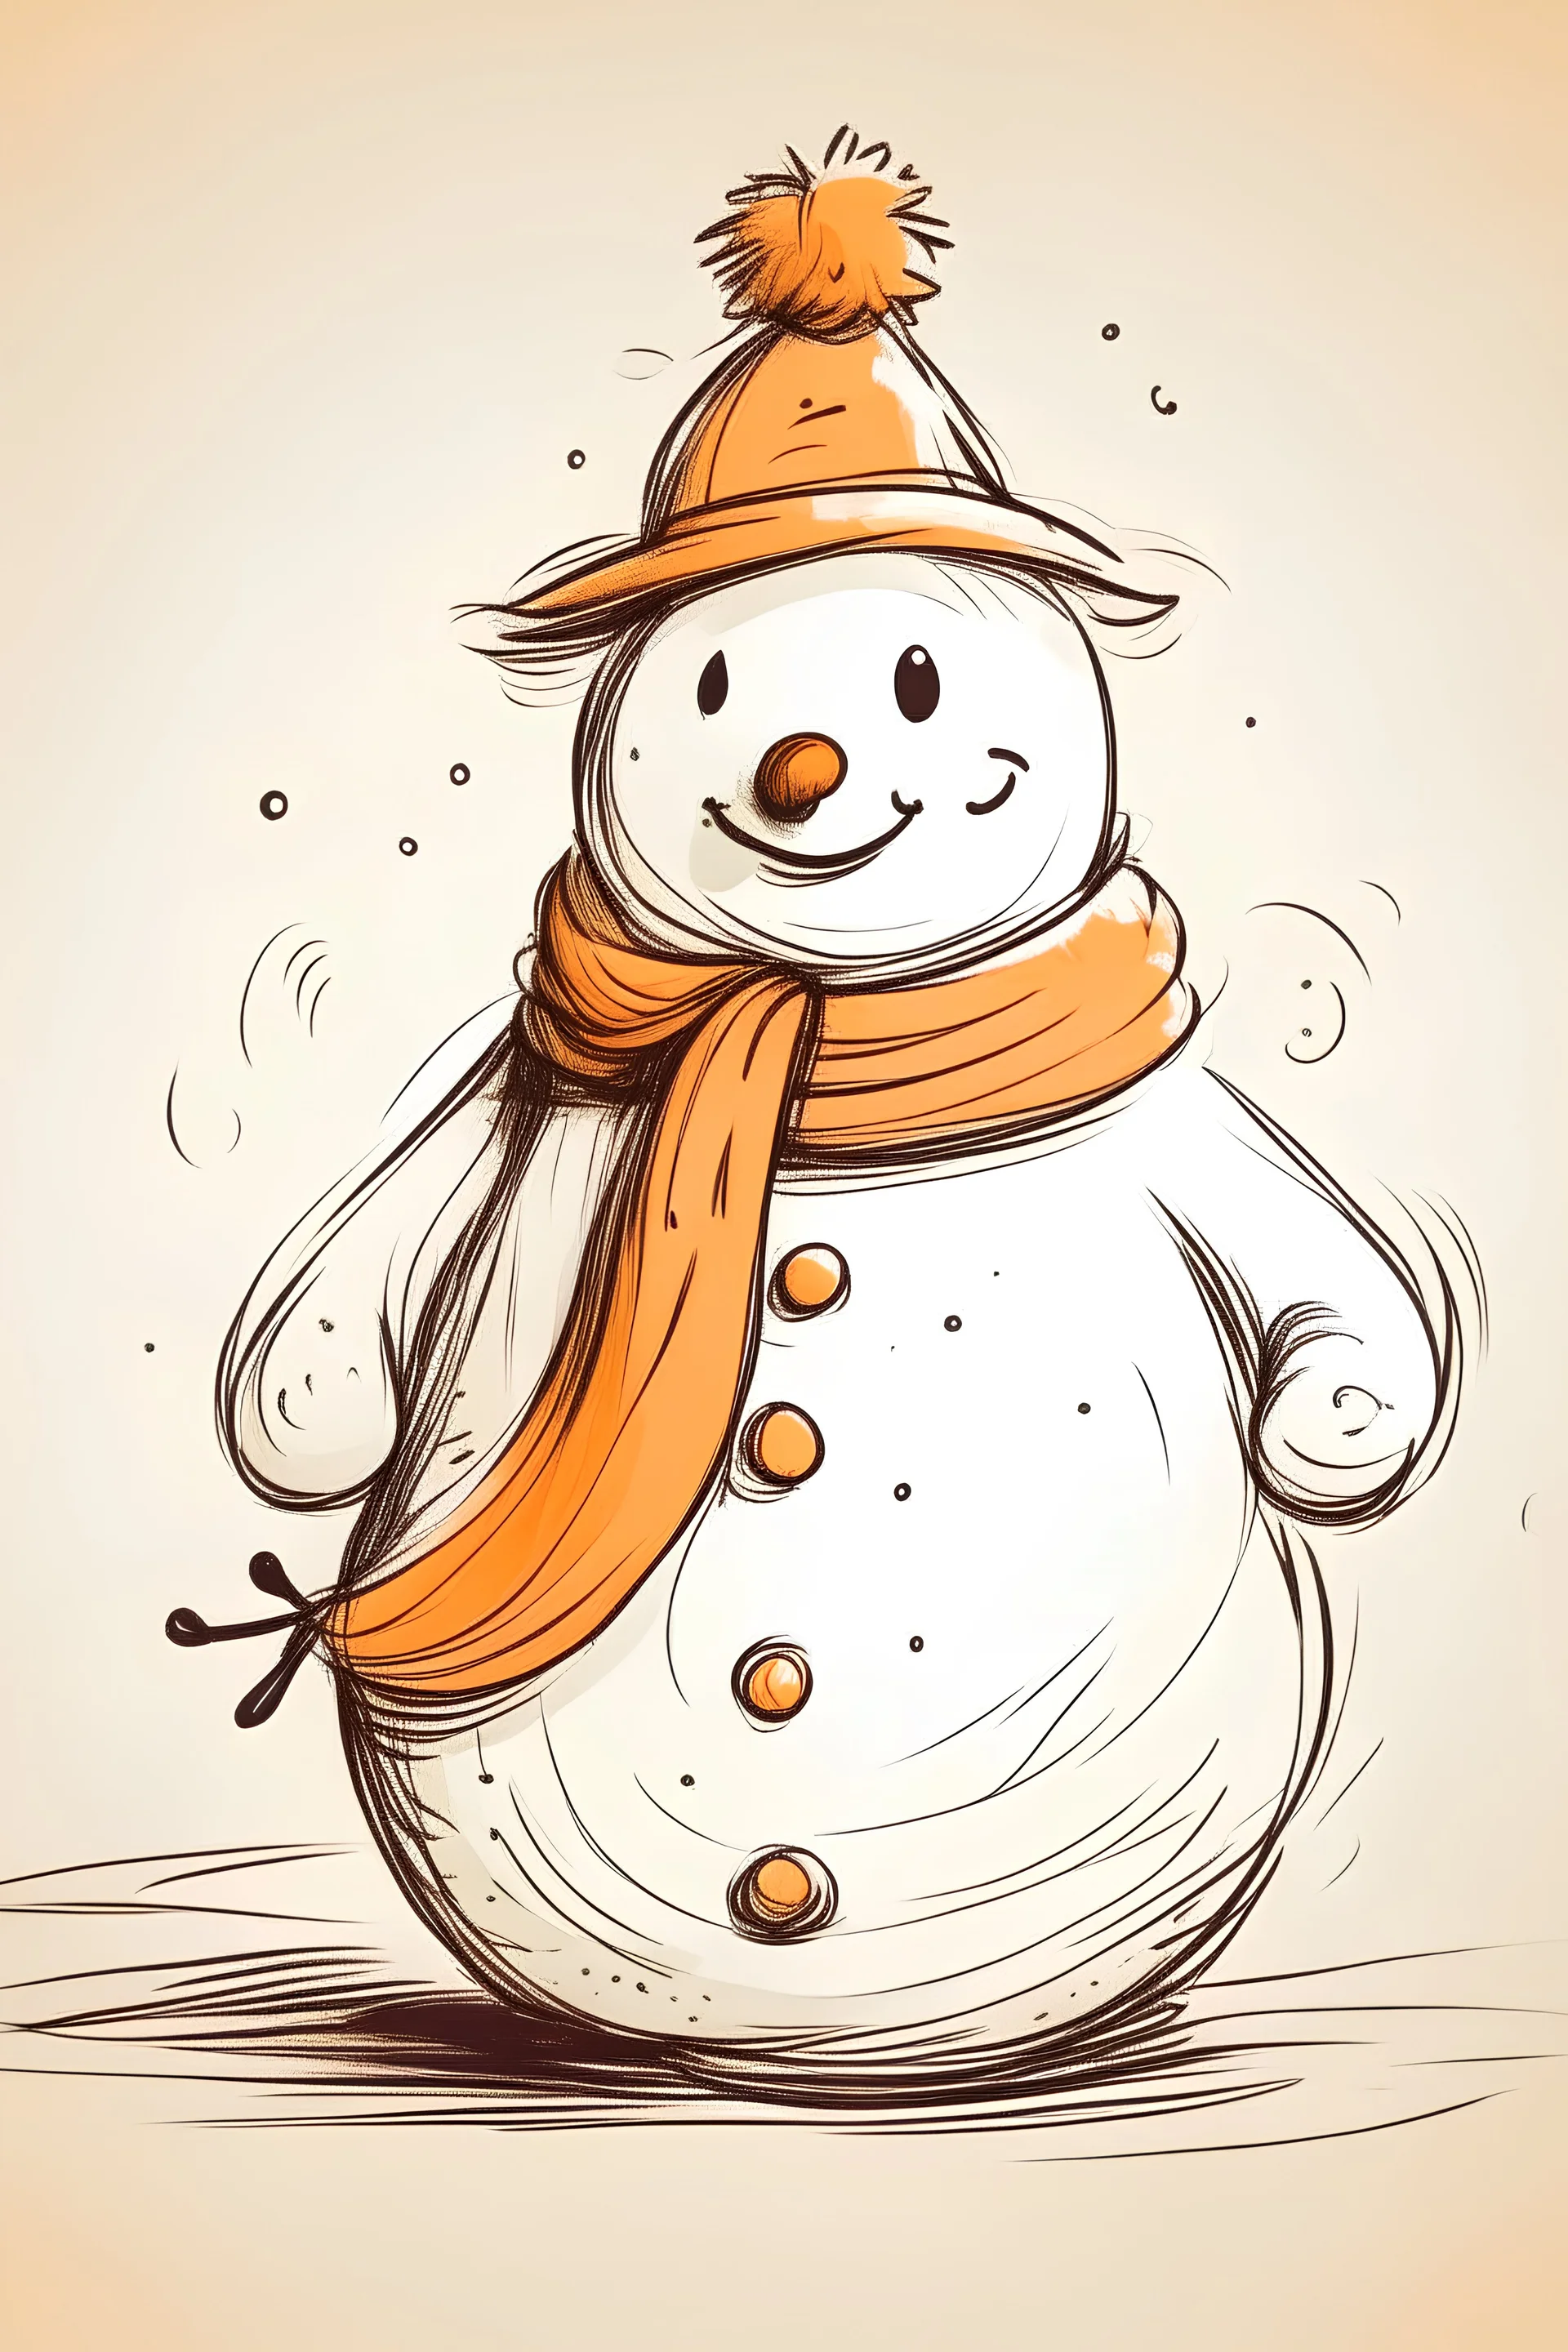 Digital drawing of a snowman by @popovajosephine, a card pack by Josephine  Popova - INPRNT